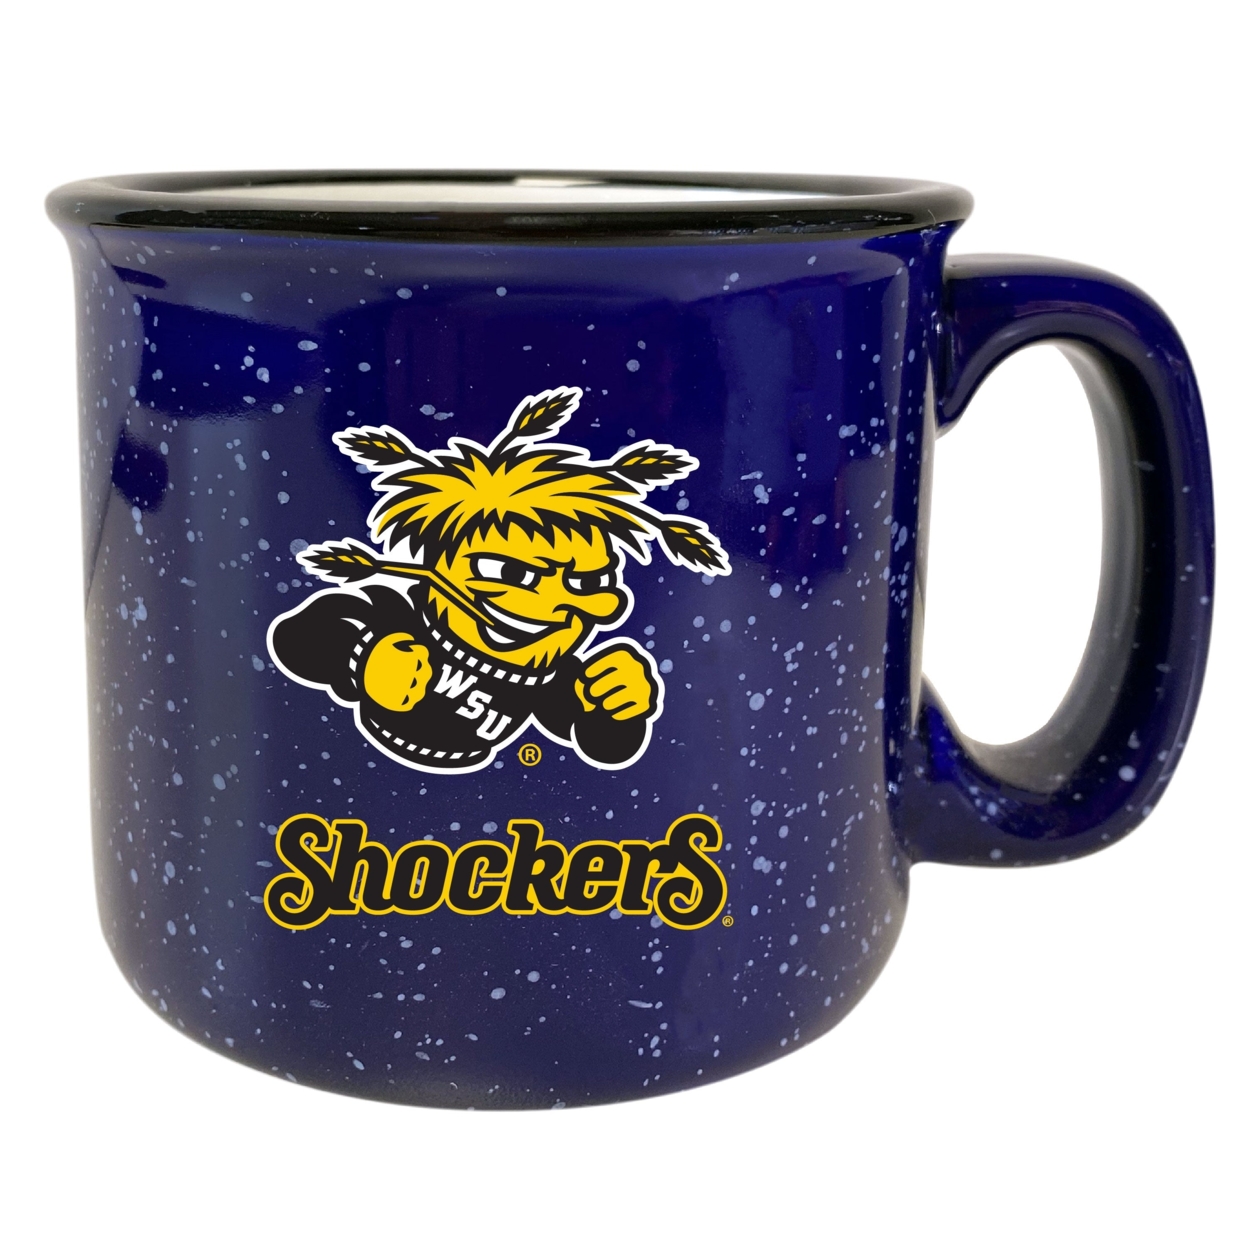 Wichita State Shockers Speckled Ceramic Camper Coffee Mug - Choose Your Color - White